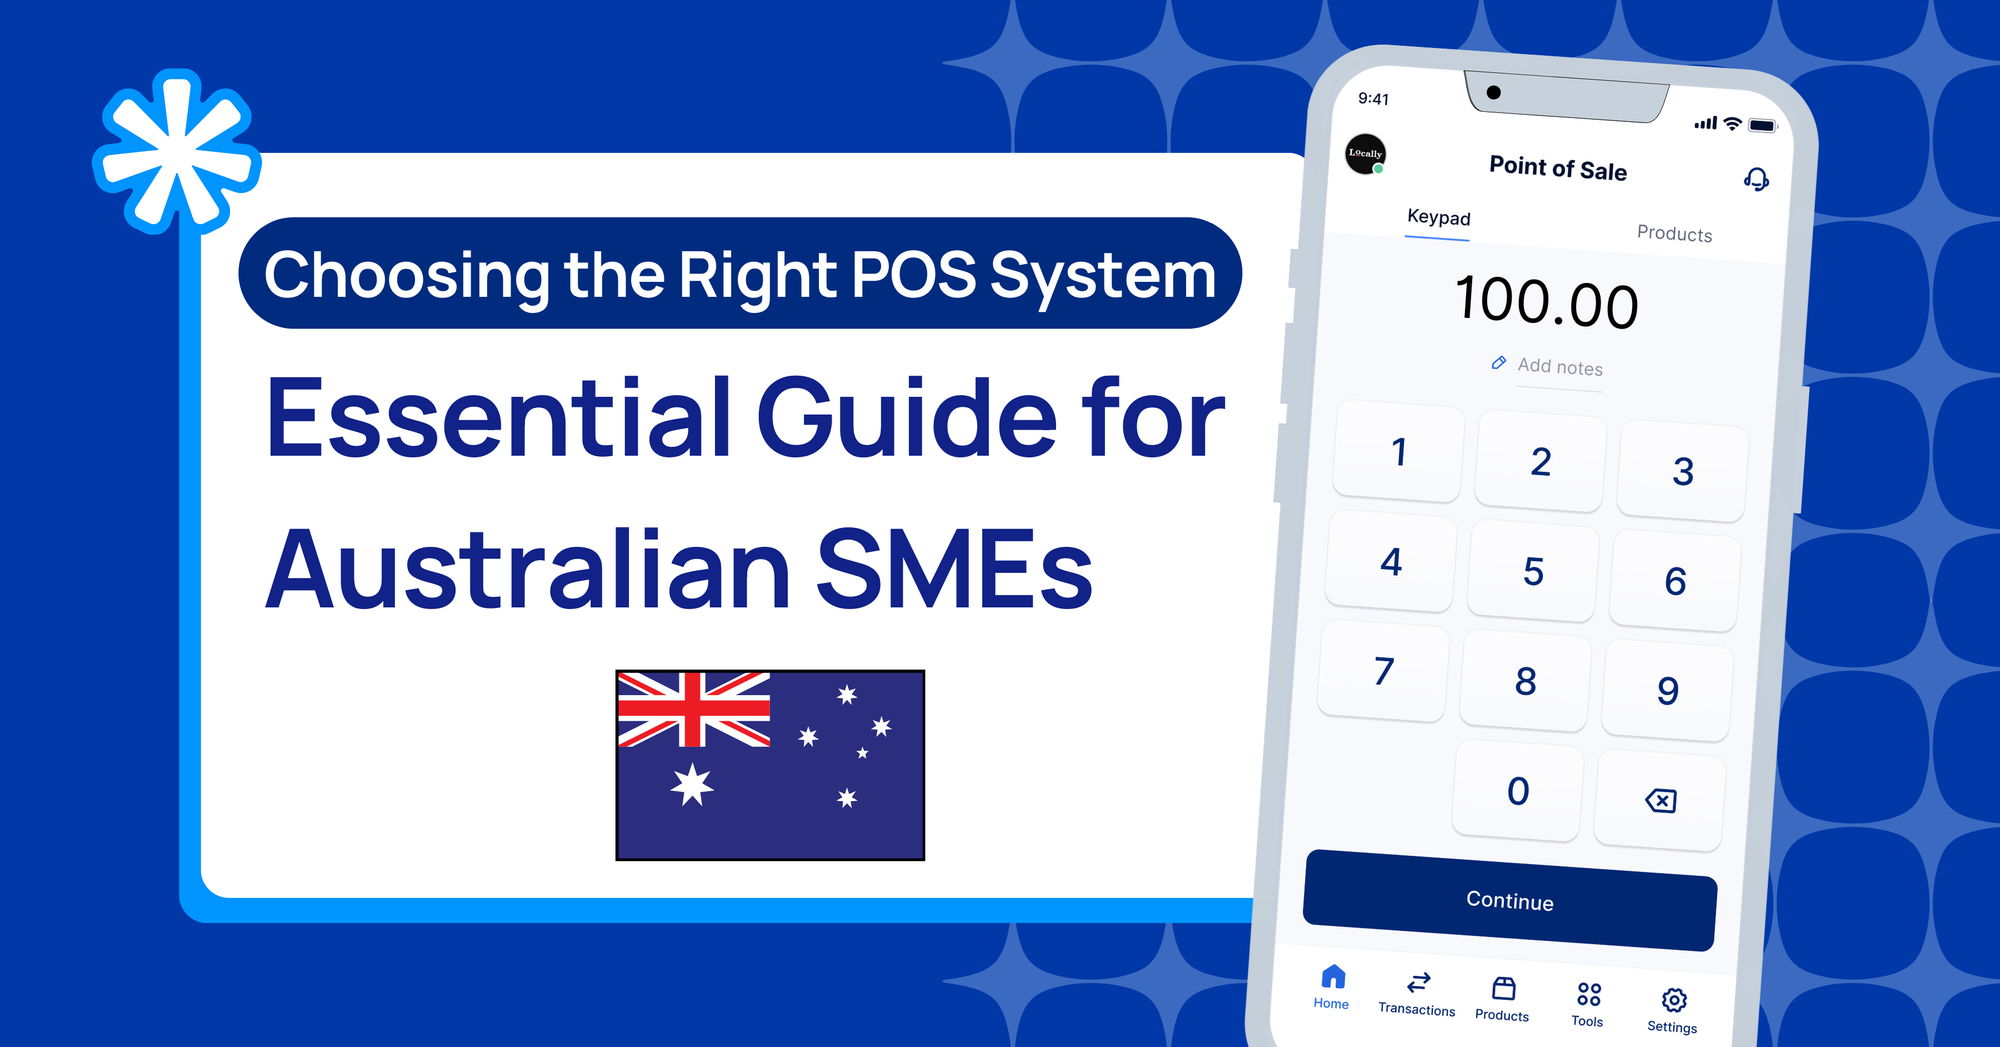 Choosing the Right POS System: Essential Guide for Australian SMEs